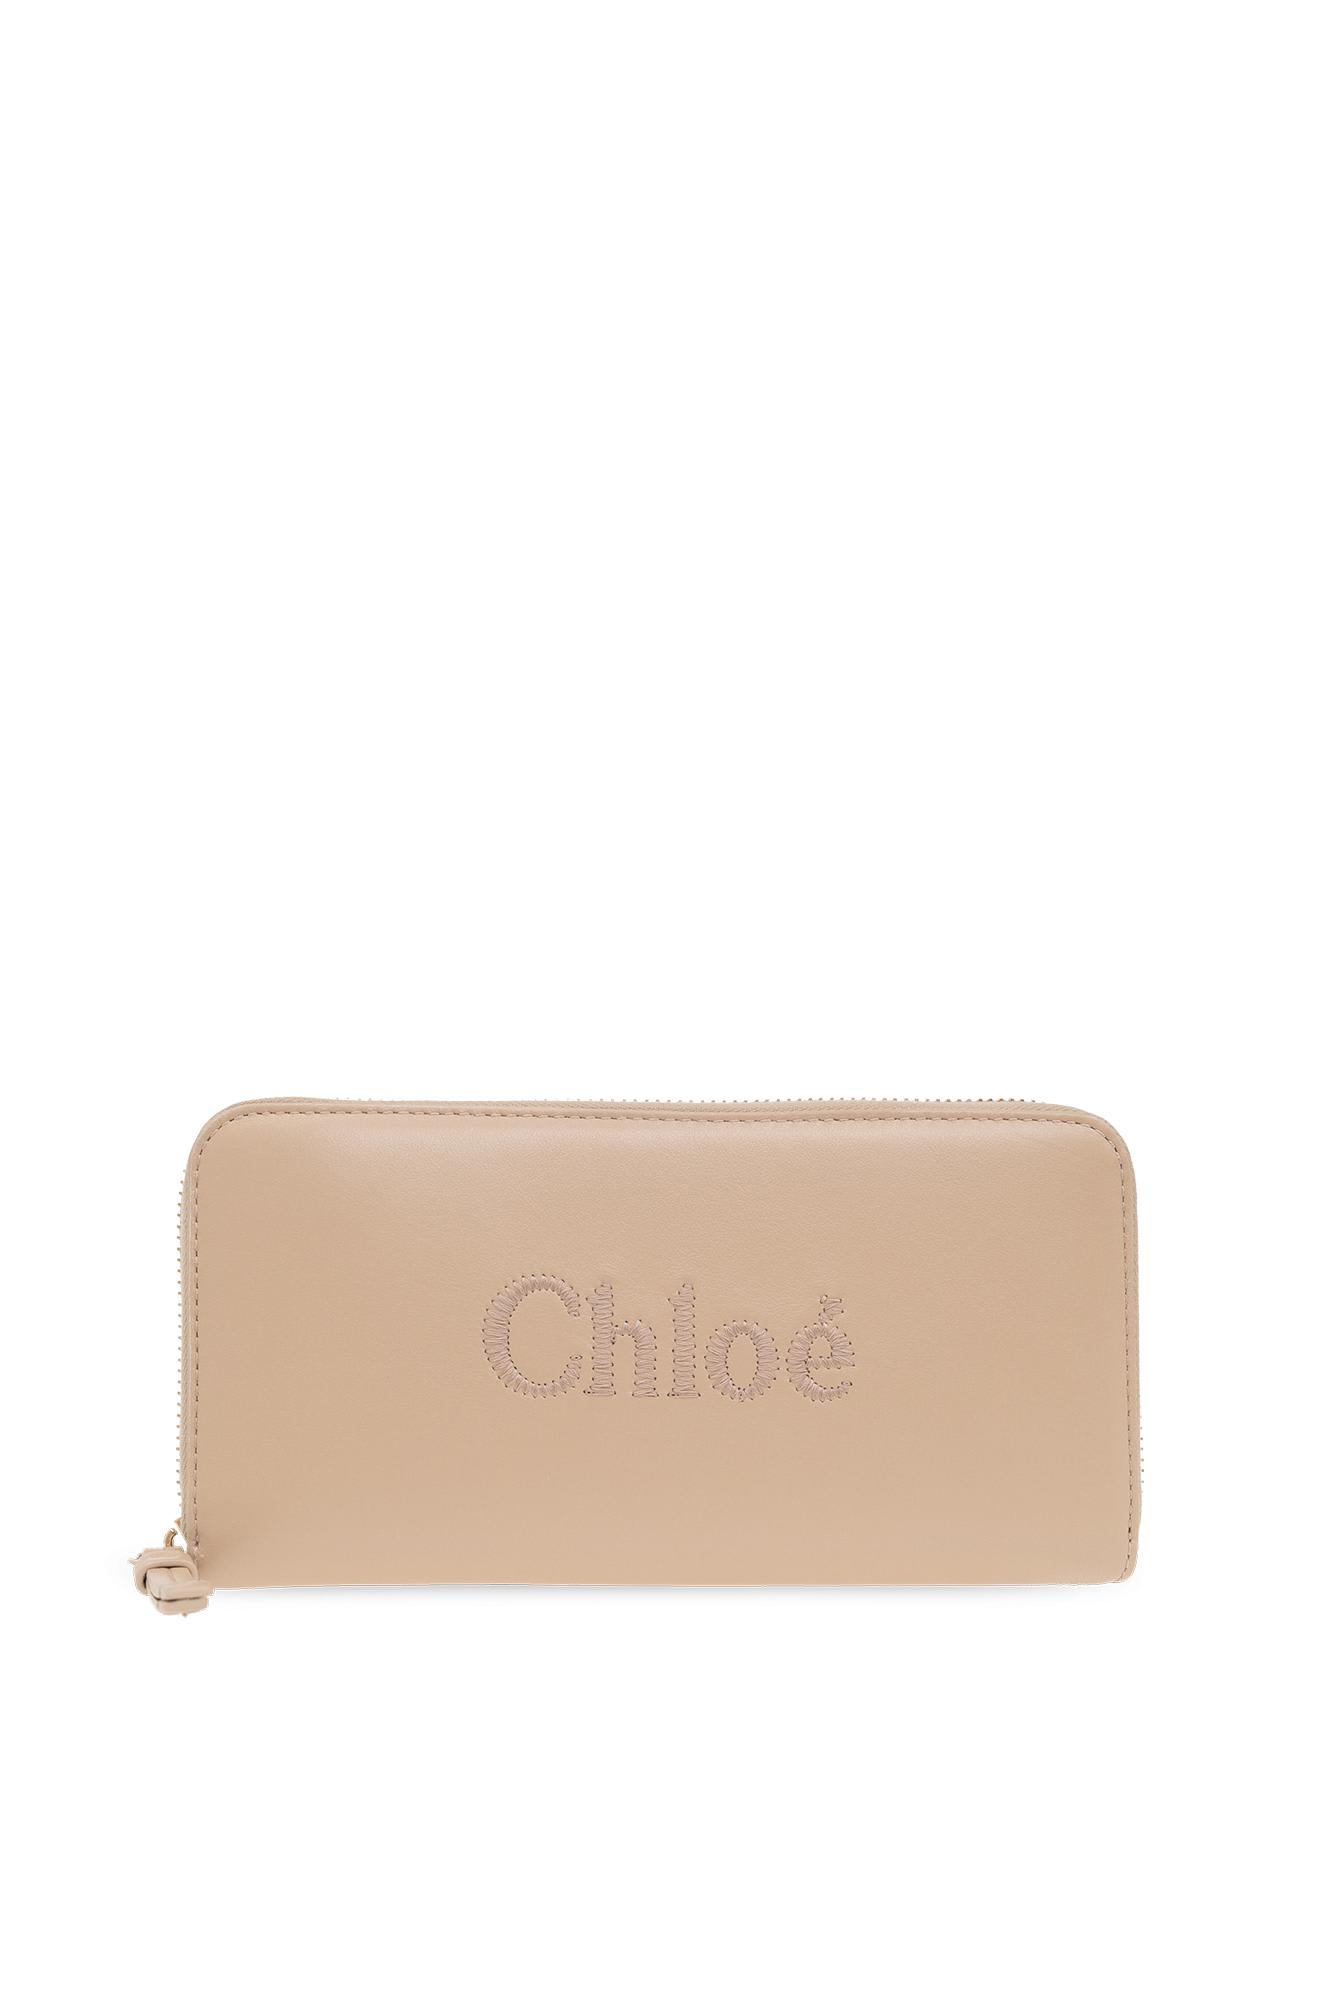 Chloé Leather Wallet With Logo In G Argil Brown